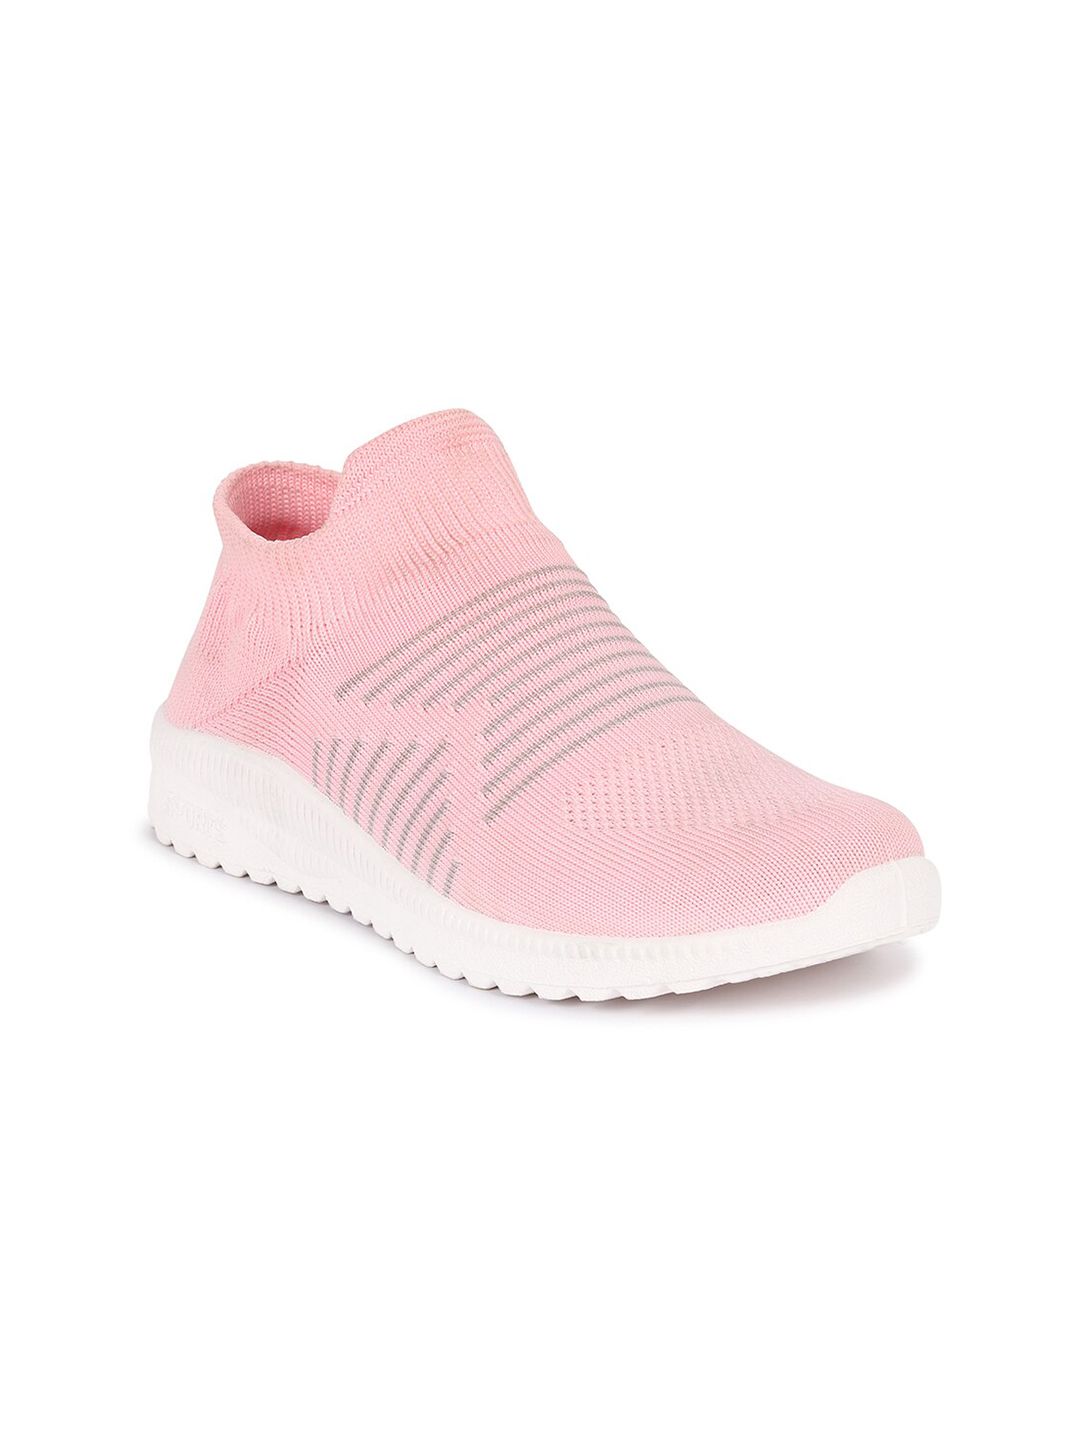 Bella Toes Women Pink Textile Walking Shoes Price in India